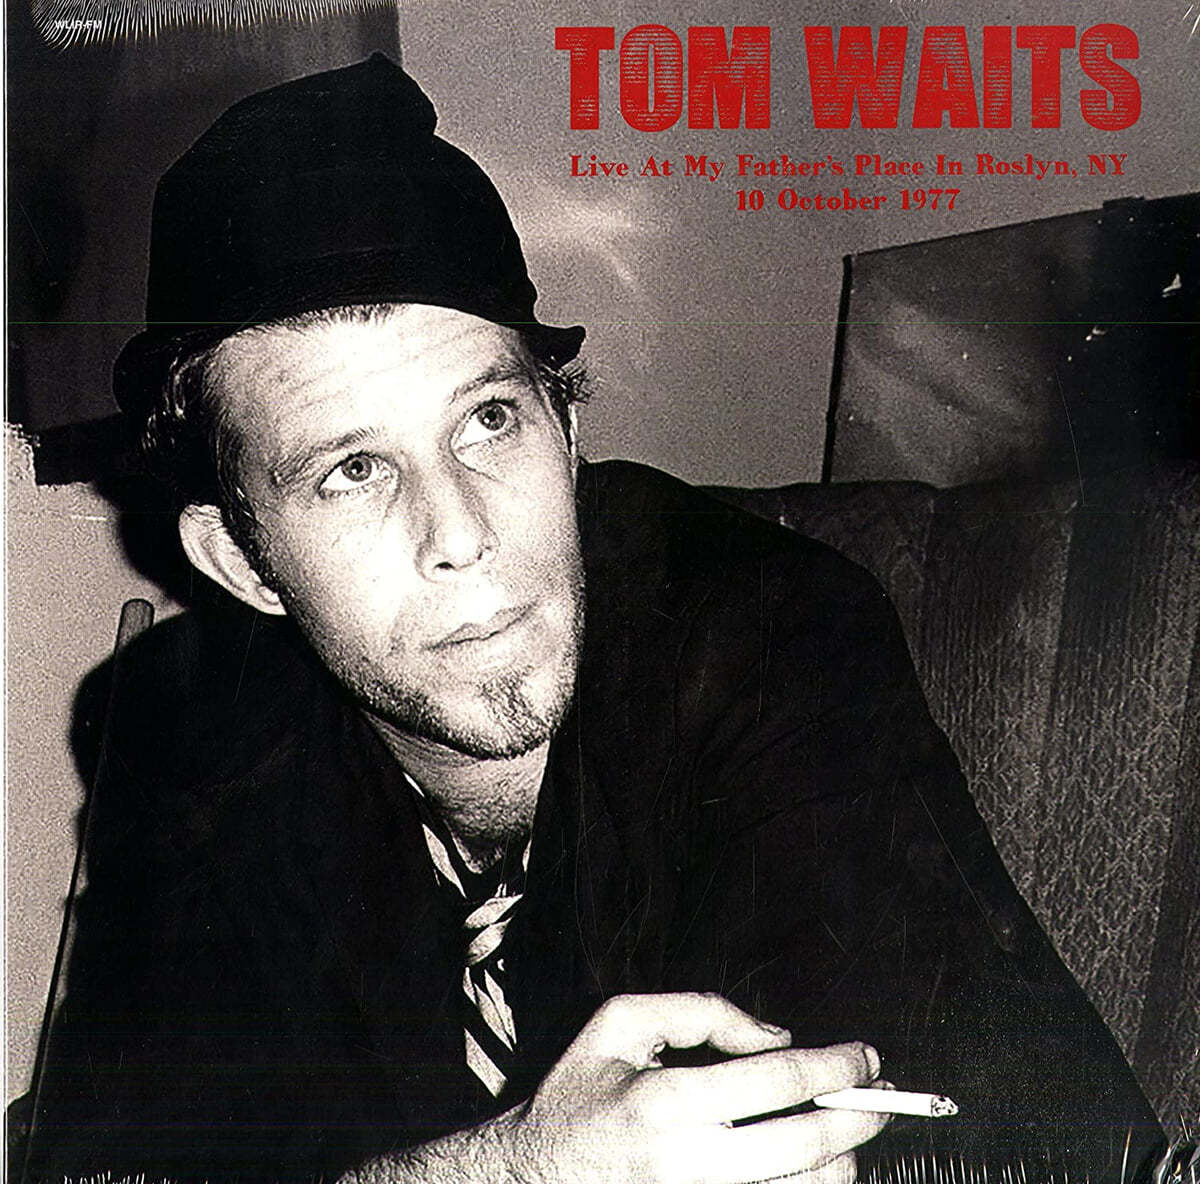 Tom Waits (탐 웨이츠) - Live At My Father’s Place In Roslyn, NY, 10 October 1977 [2LP]